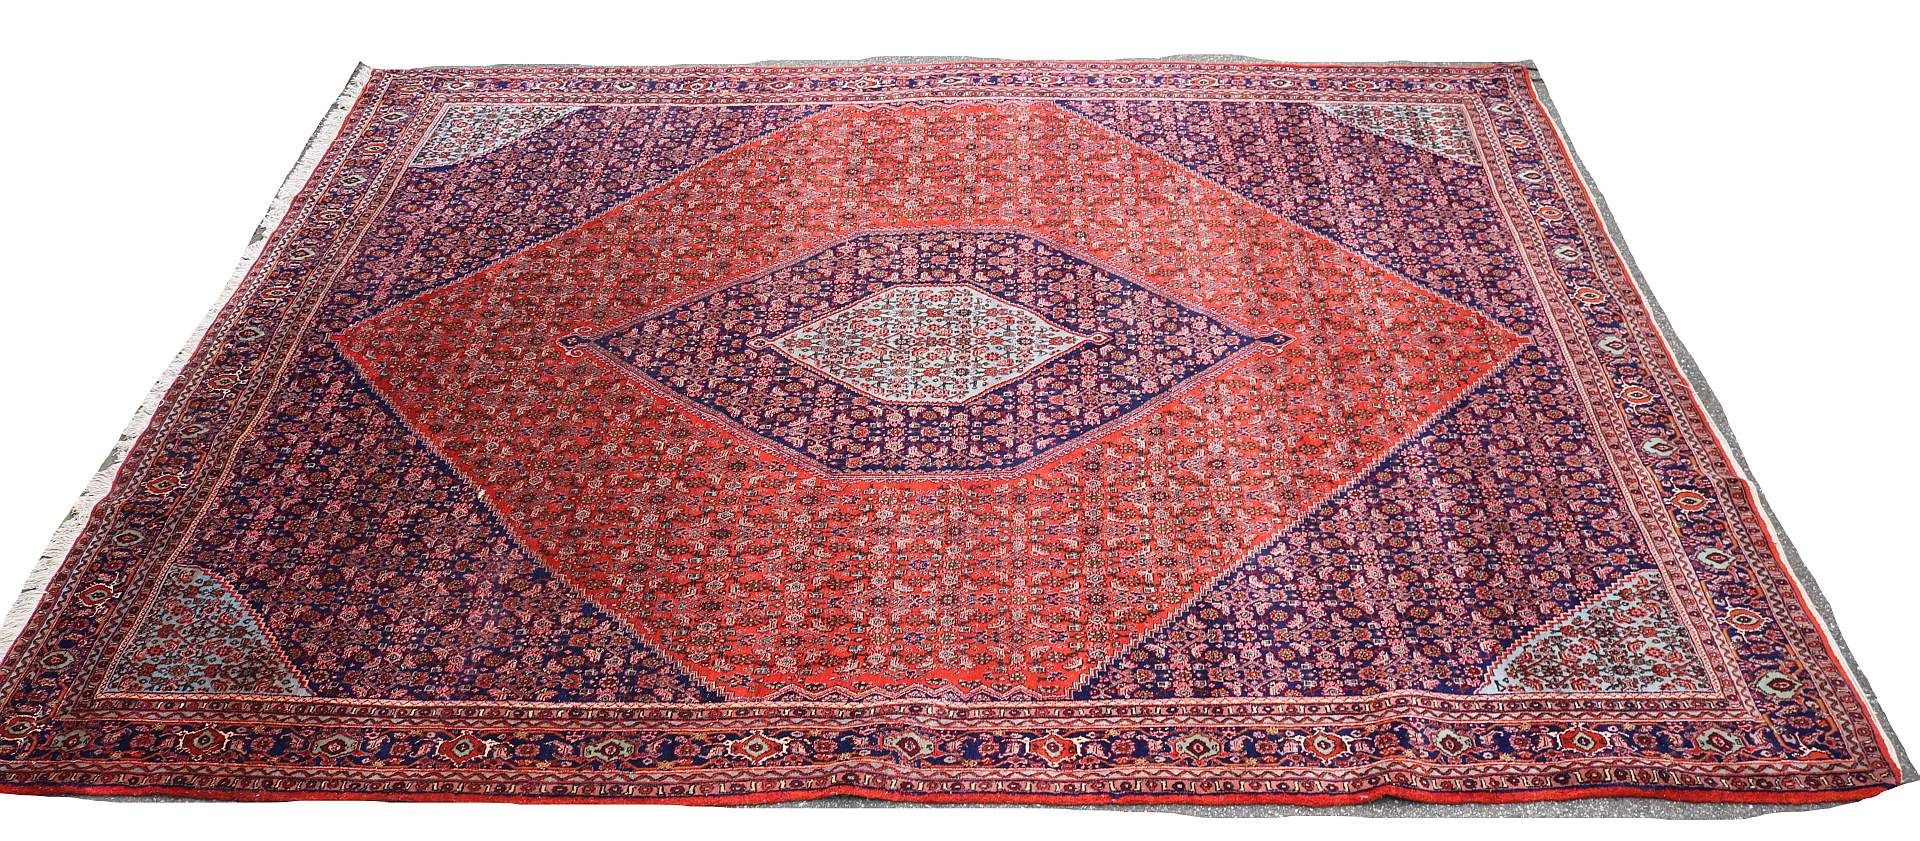 Very large Persian rug, 300 x 400 cm.